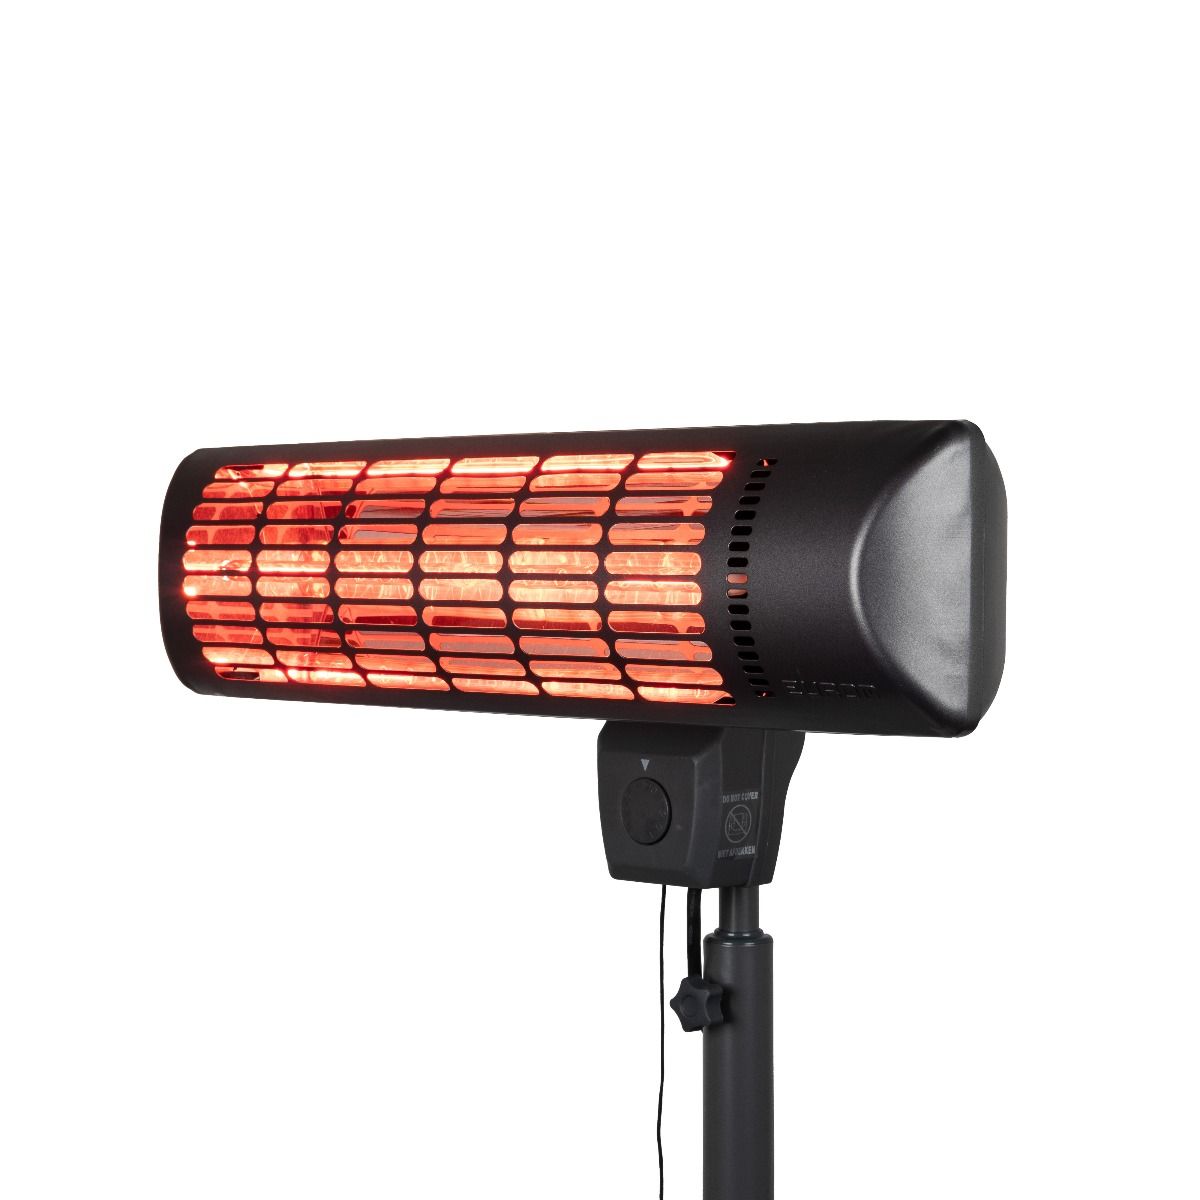 Eurom Q-time 1800S Golden patio heater